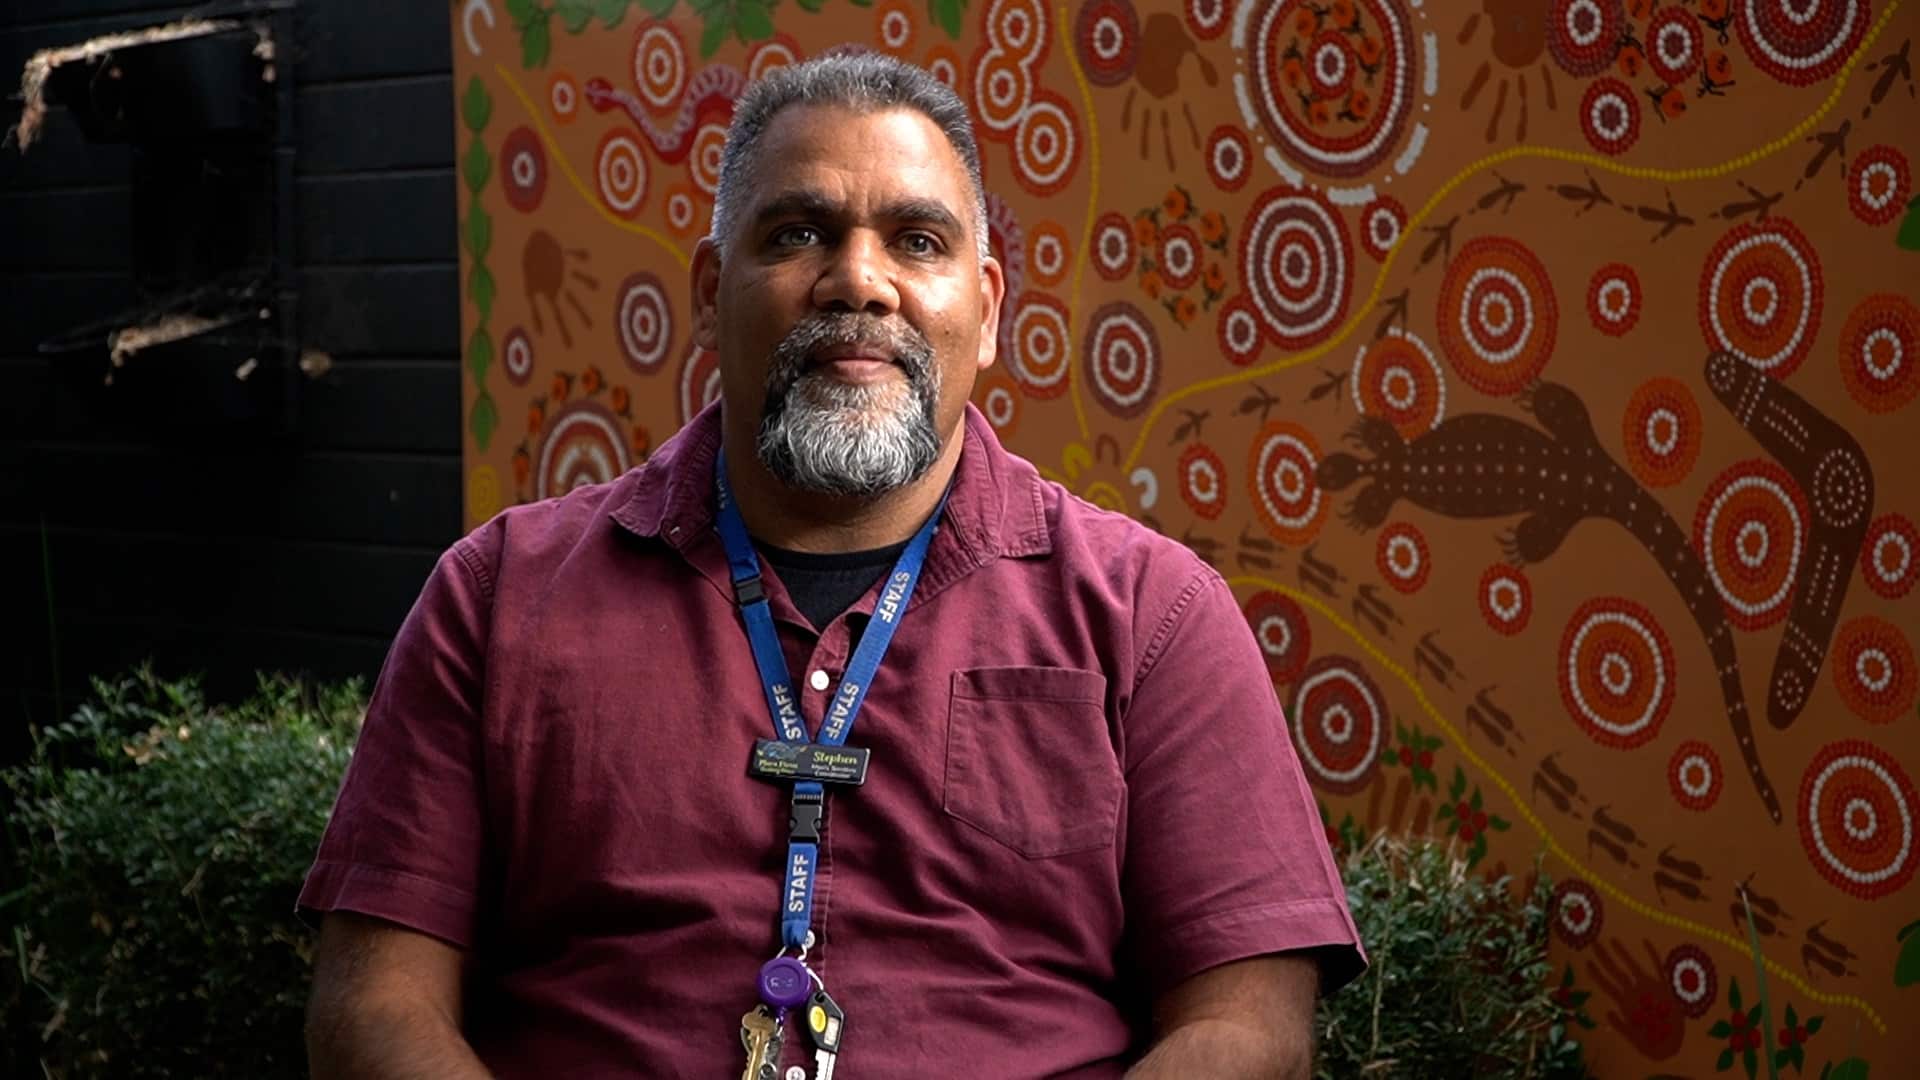 A man - Stephen Morrison - sits in front of a wall featuring a detailed Aboriginal artwork.